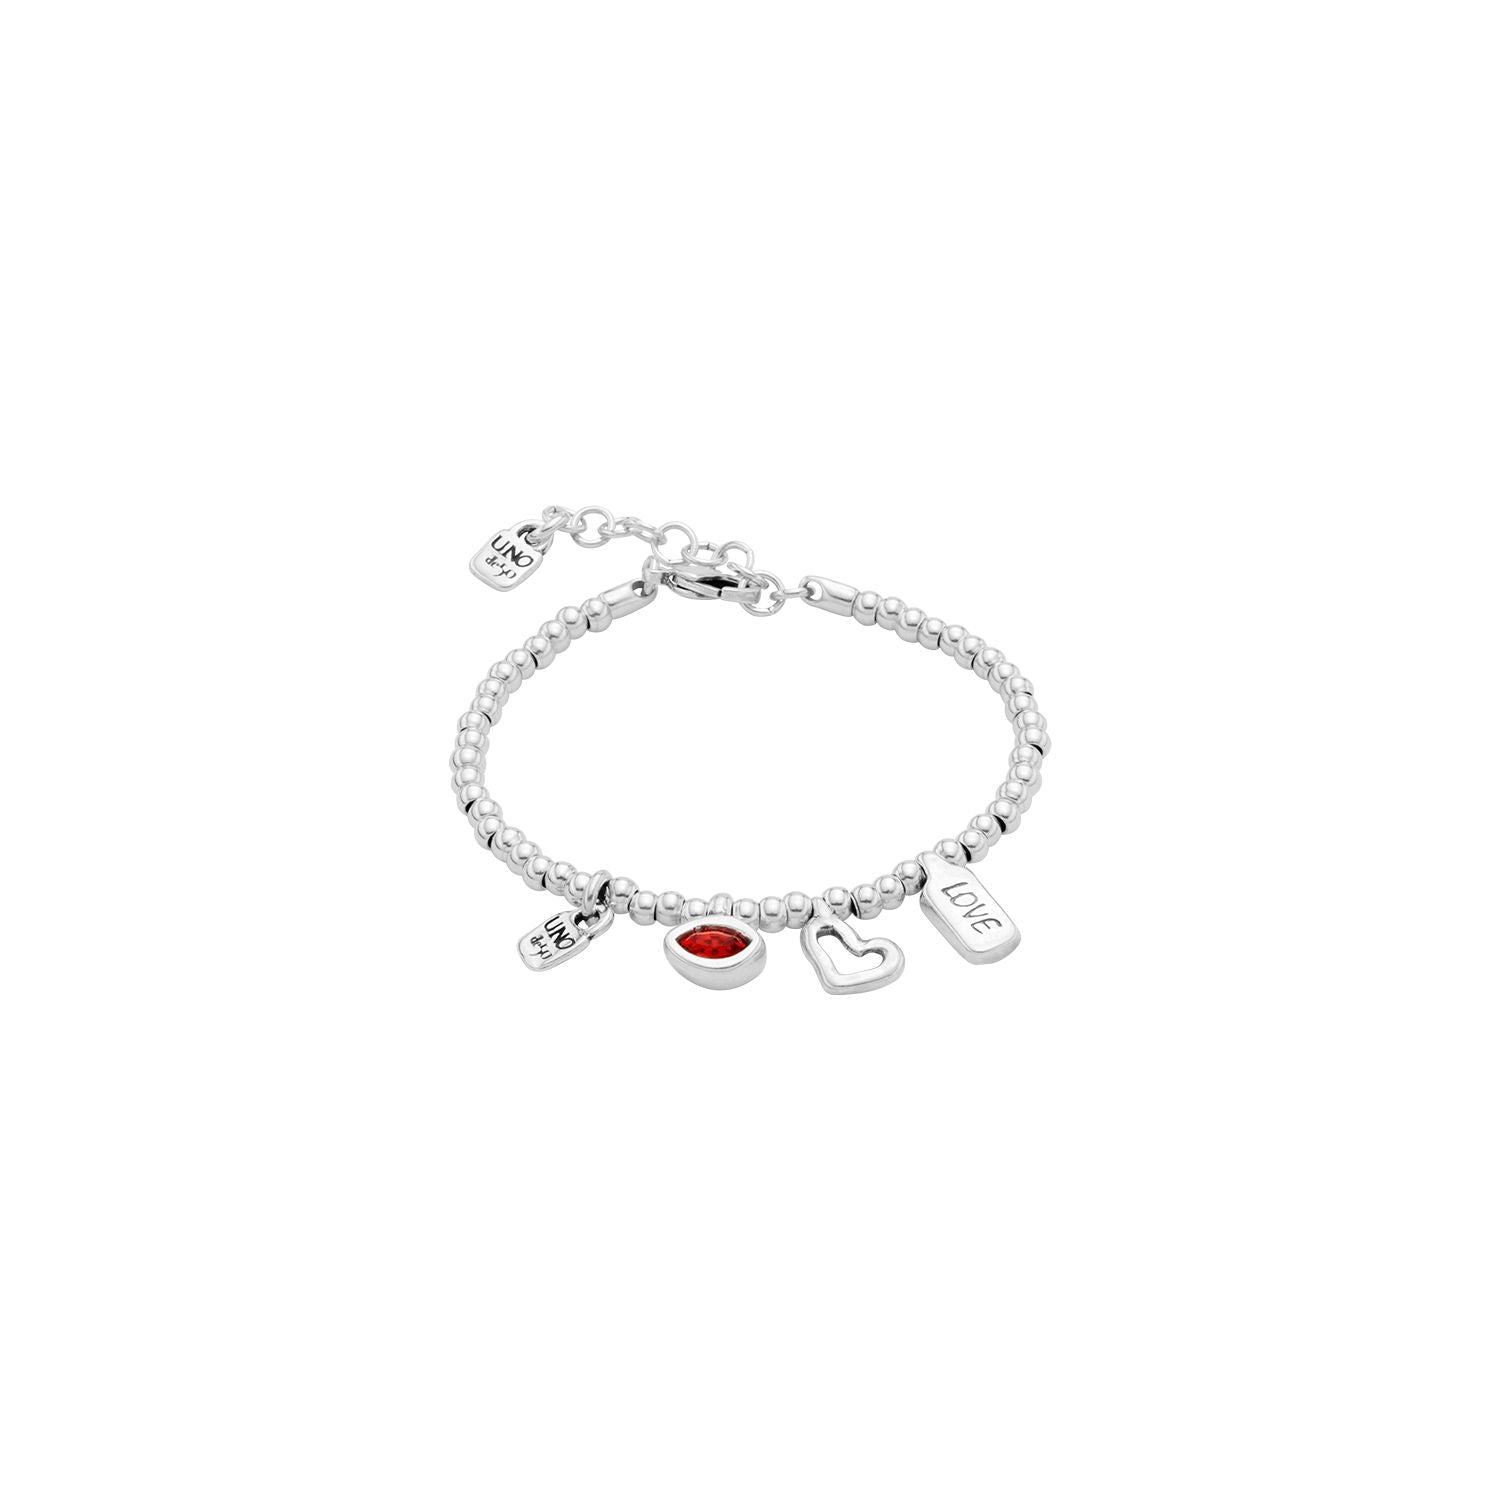 I'MWAITING FOR YOU RED - Simmi gioiellerie -Bracciale